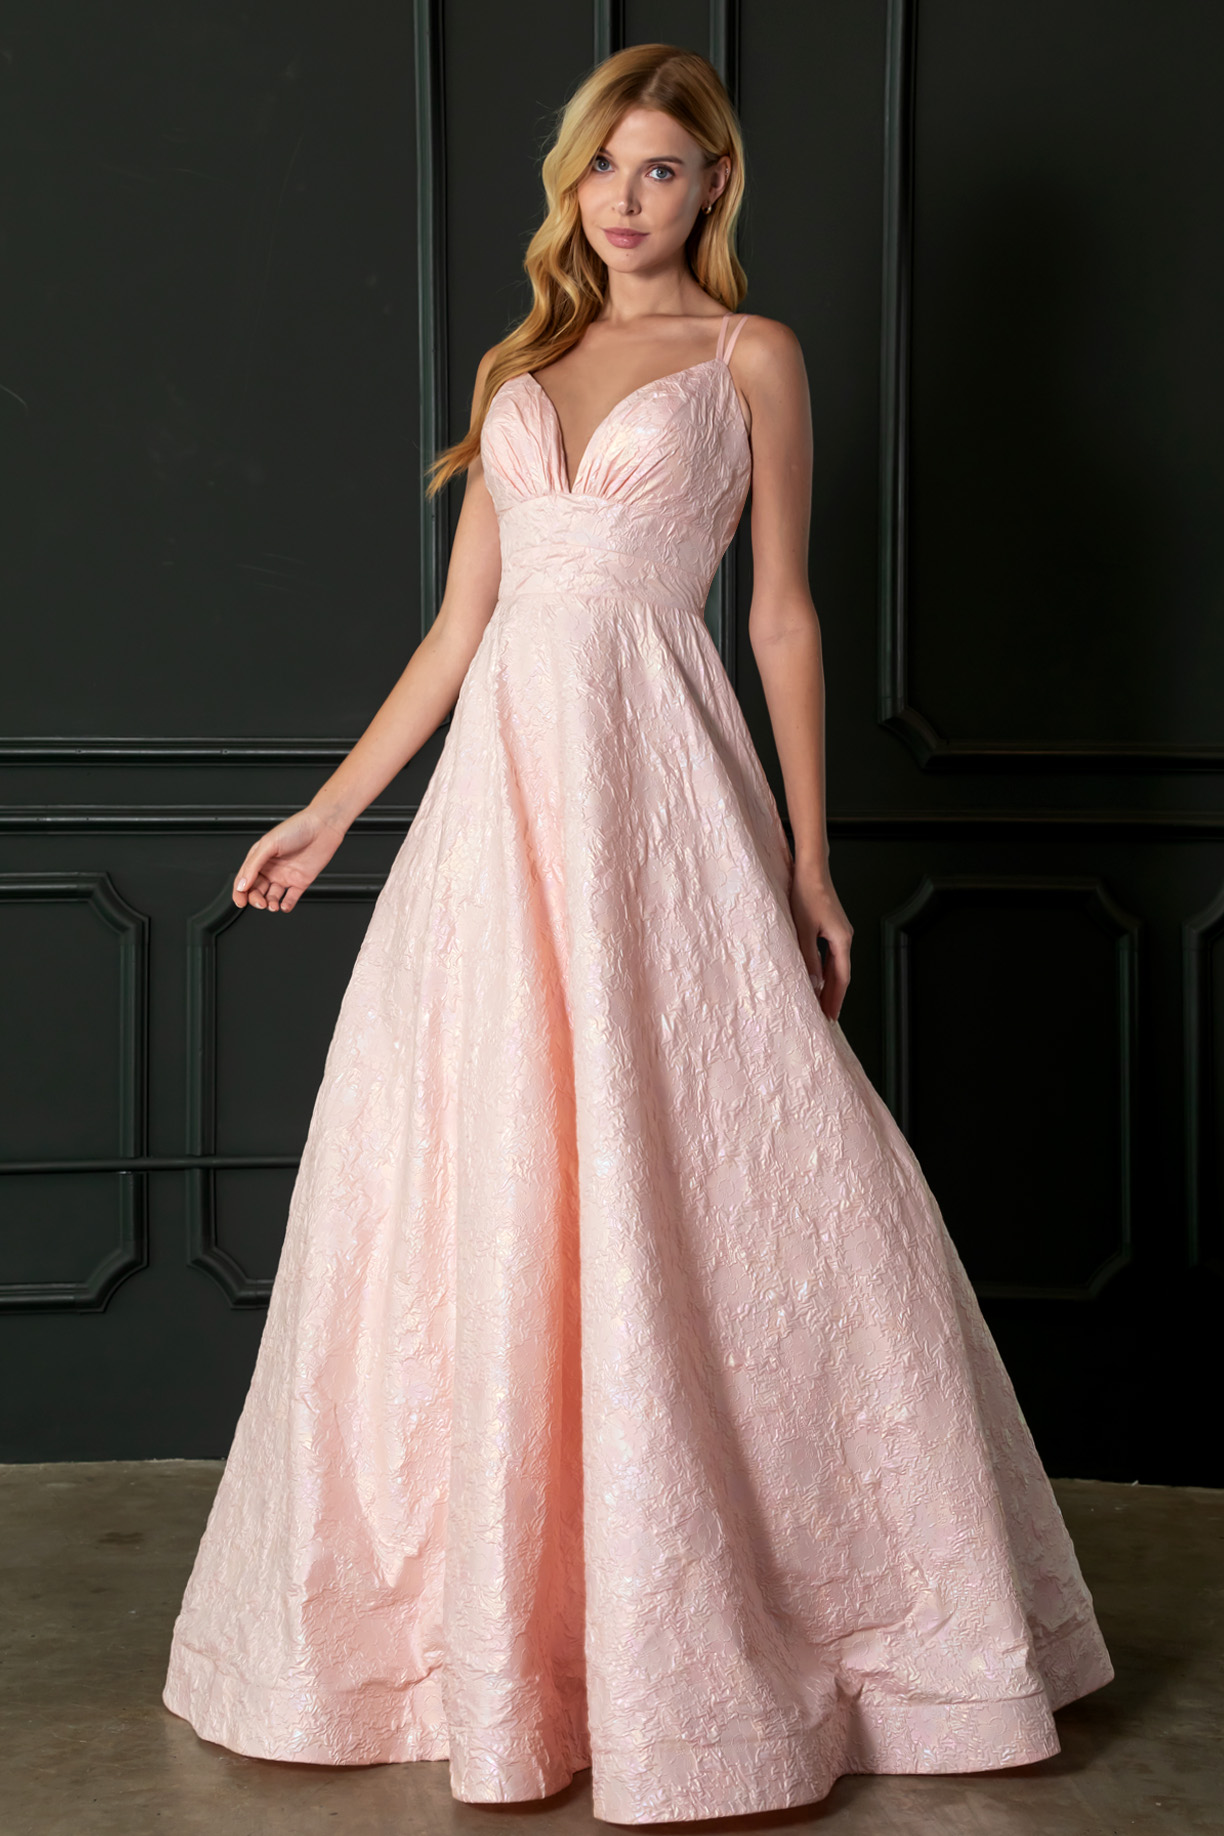 SLEEVLESS, SHOULDER STRAPS, BALL GOWN